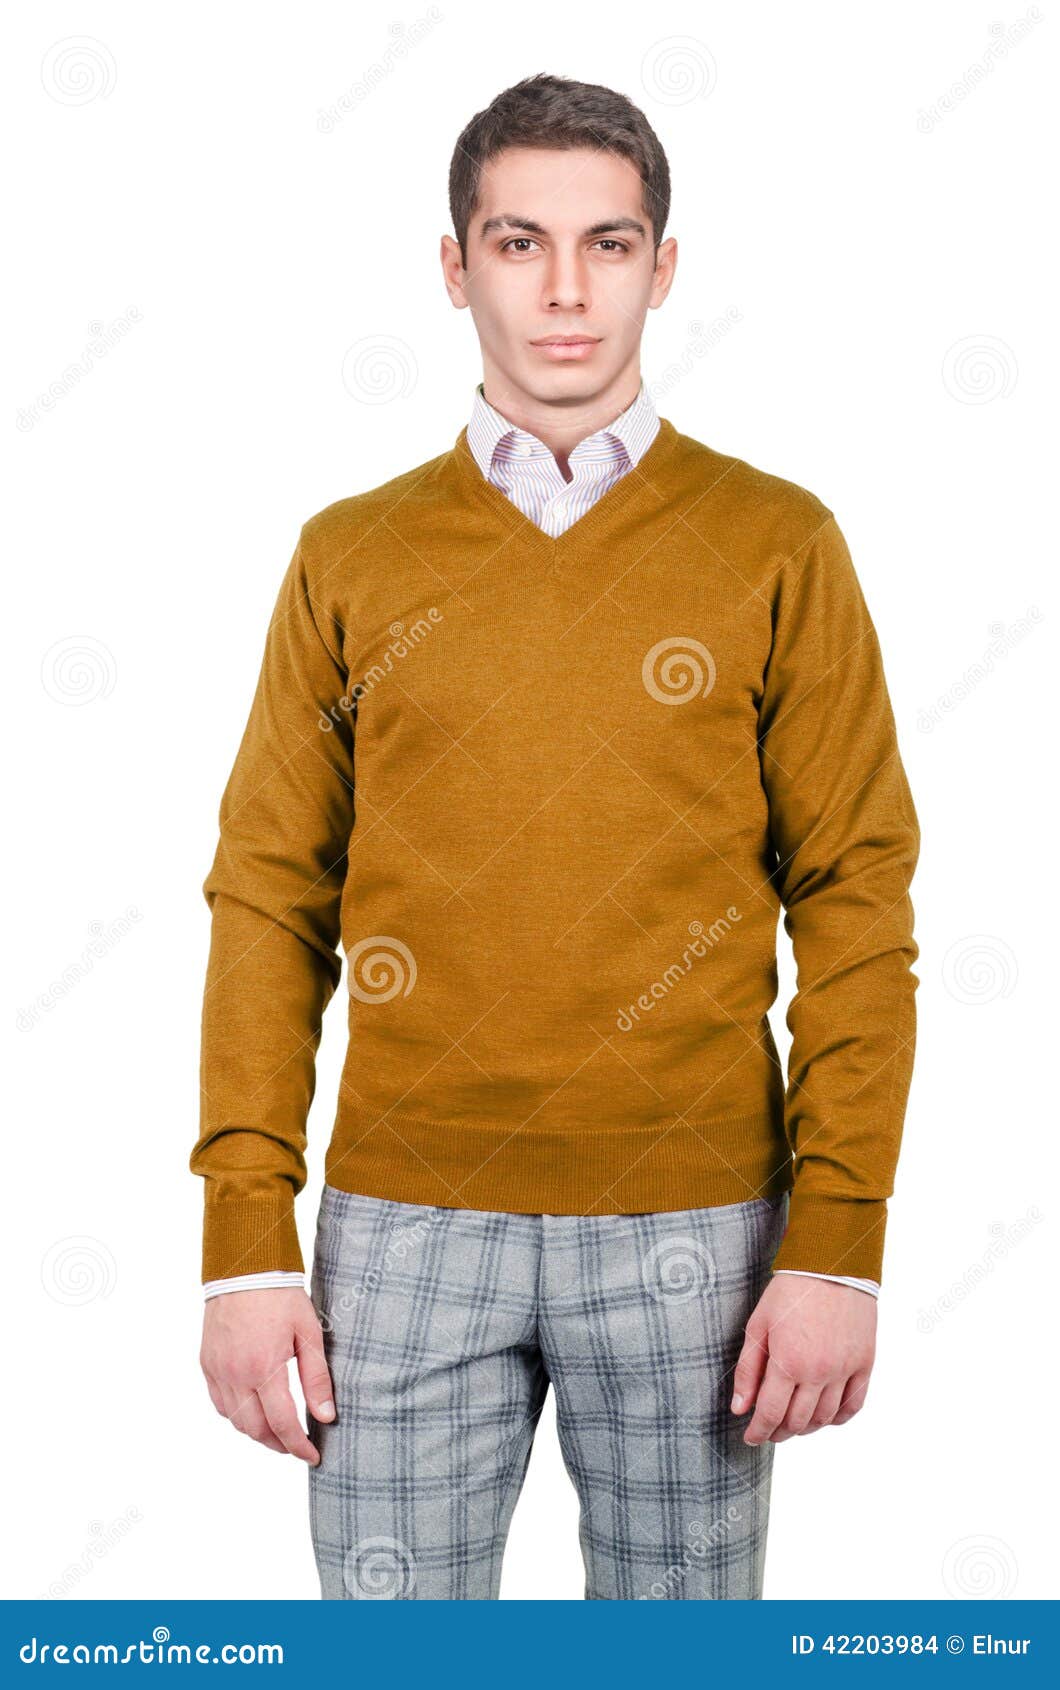 Male sweater stock photo. Image of beautiful, color, jacket - 42203984